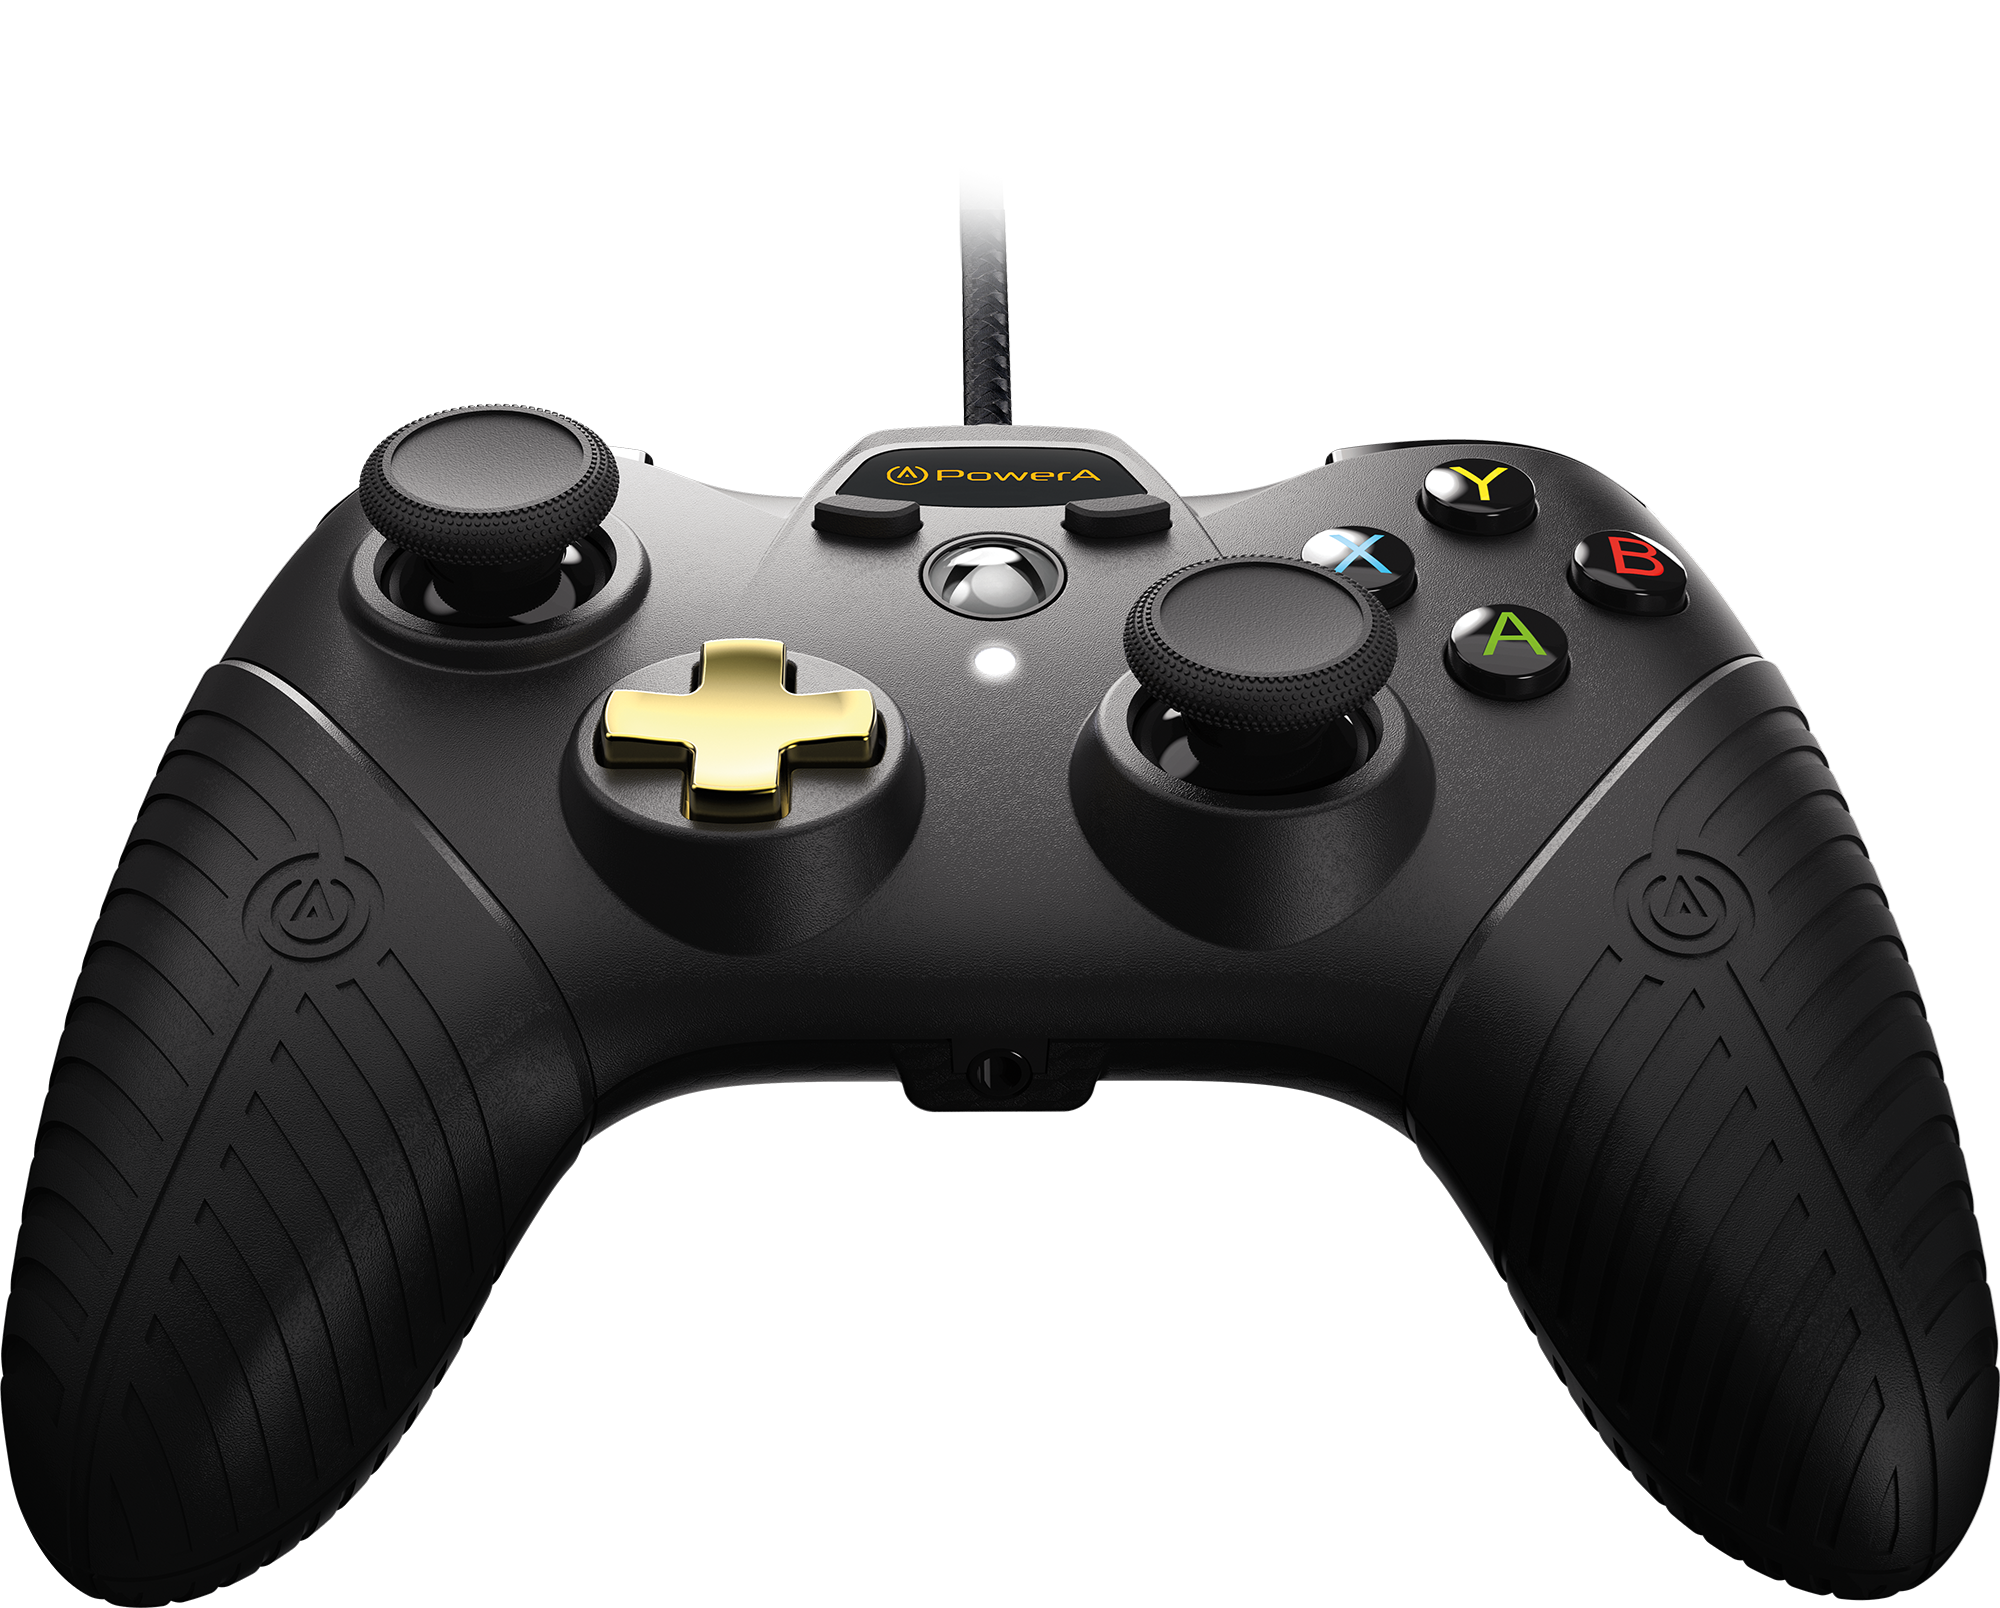 fusion controller features